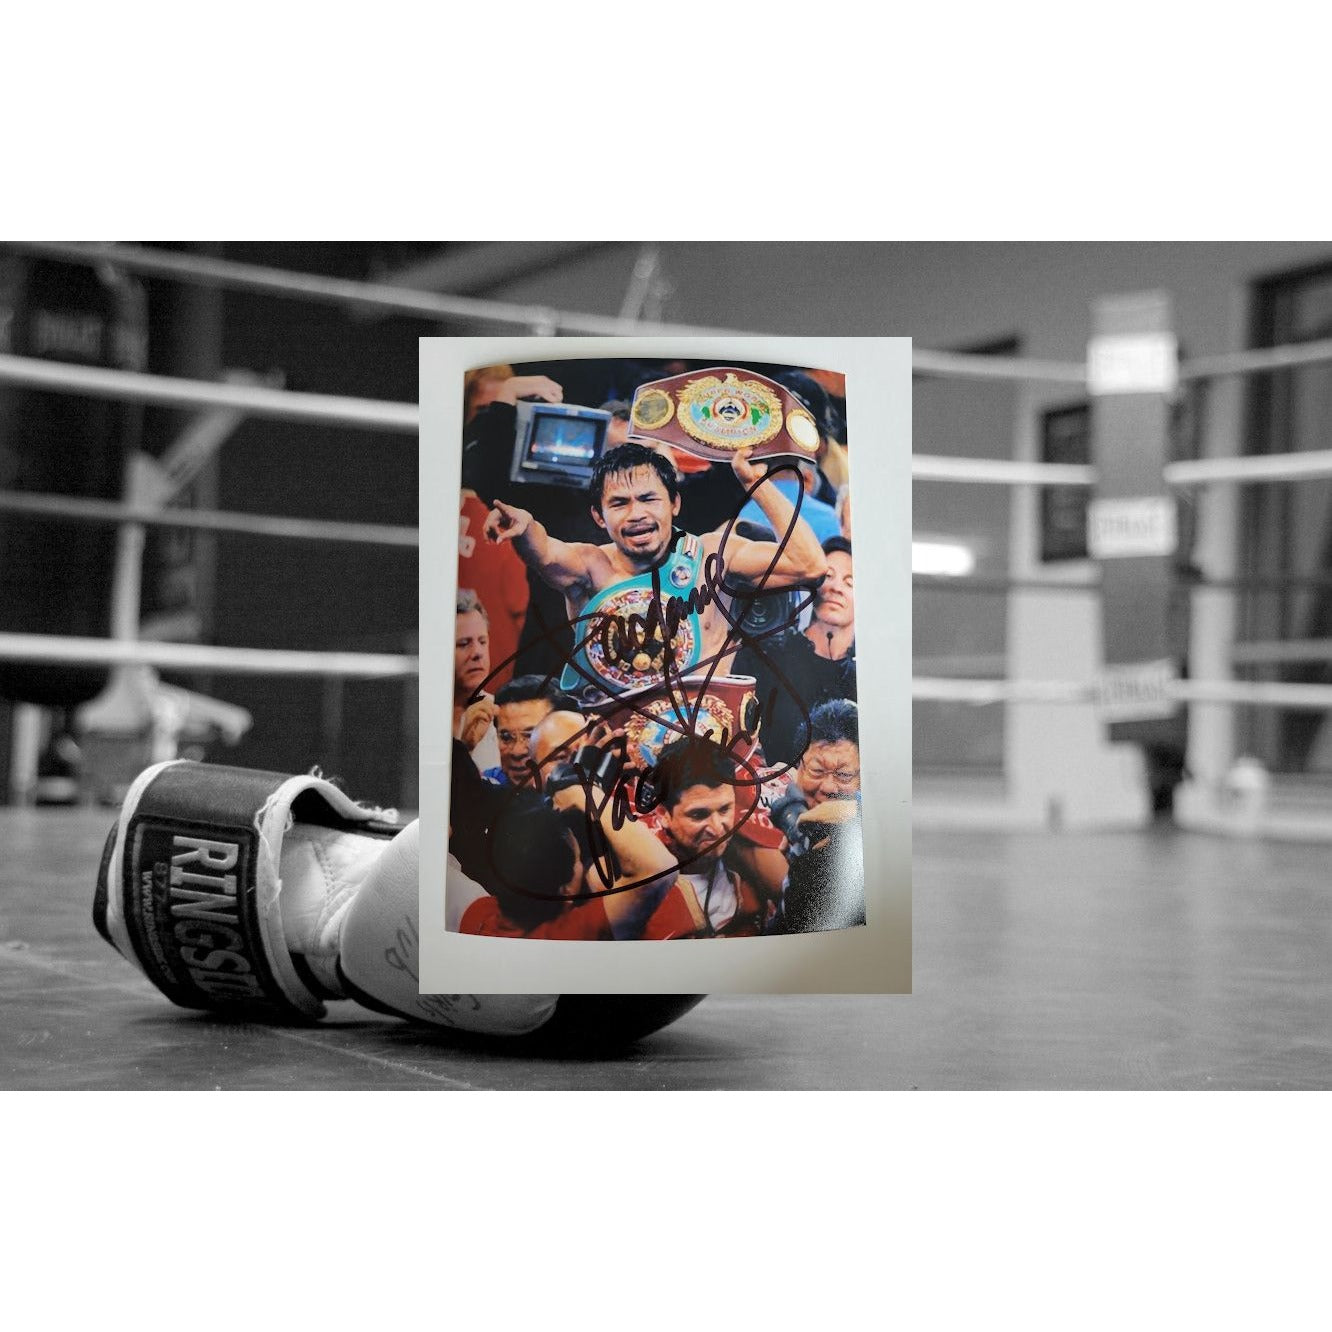 Manny Pacquiao 5 x 7 photograph signed